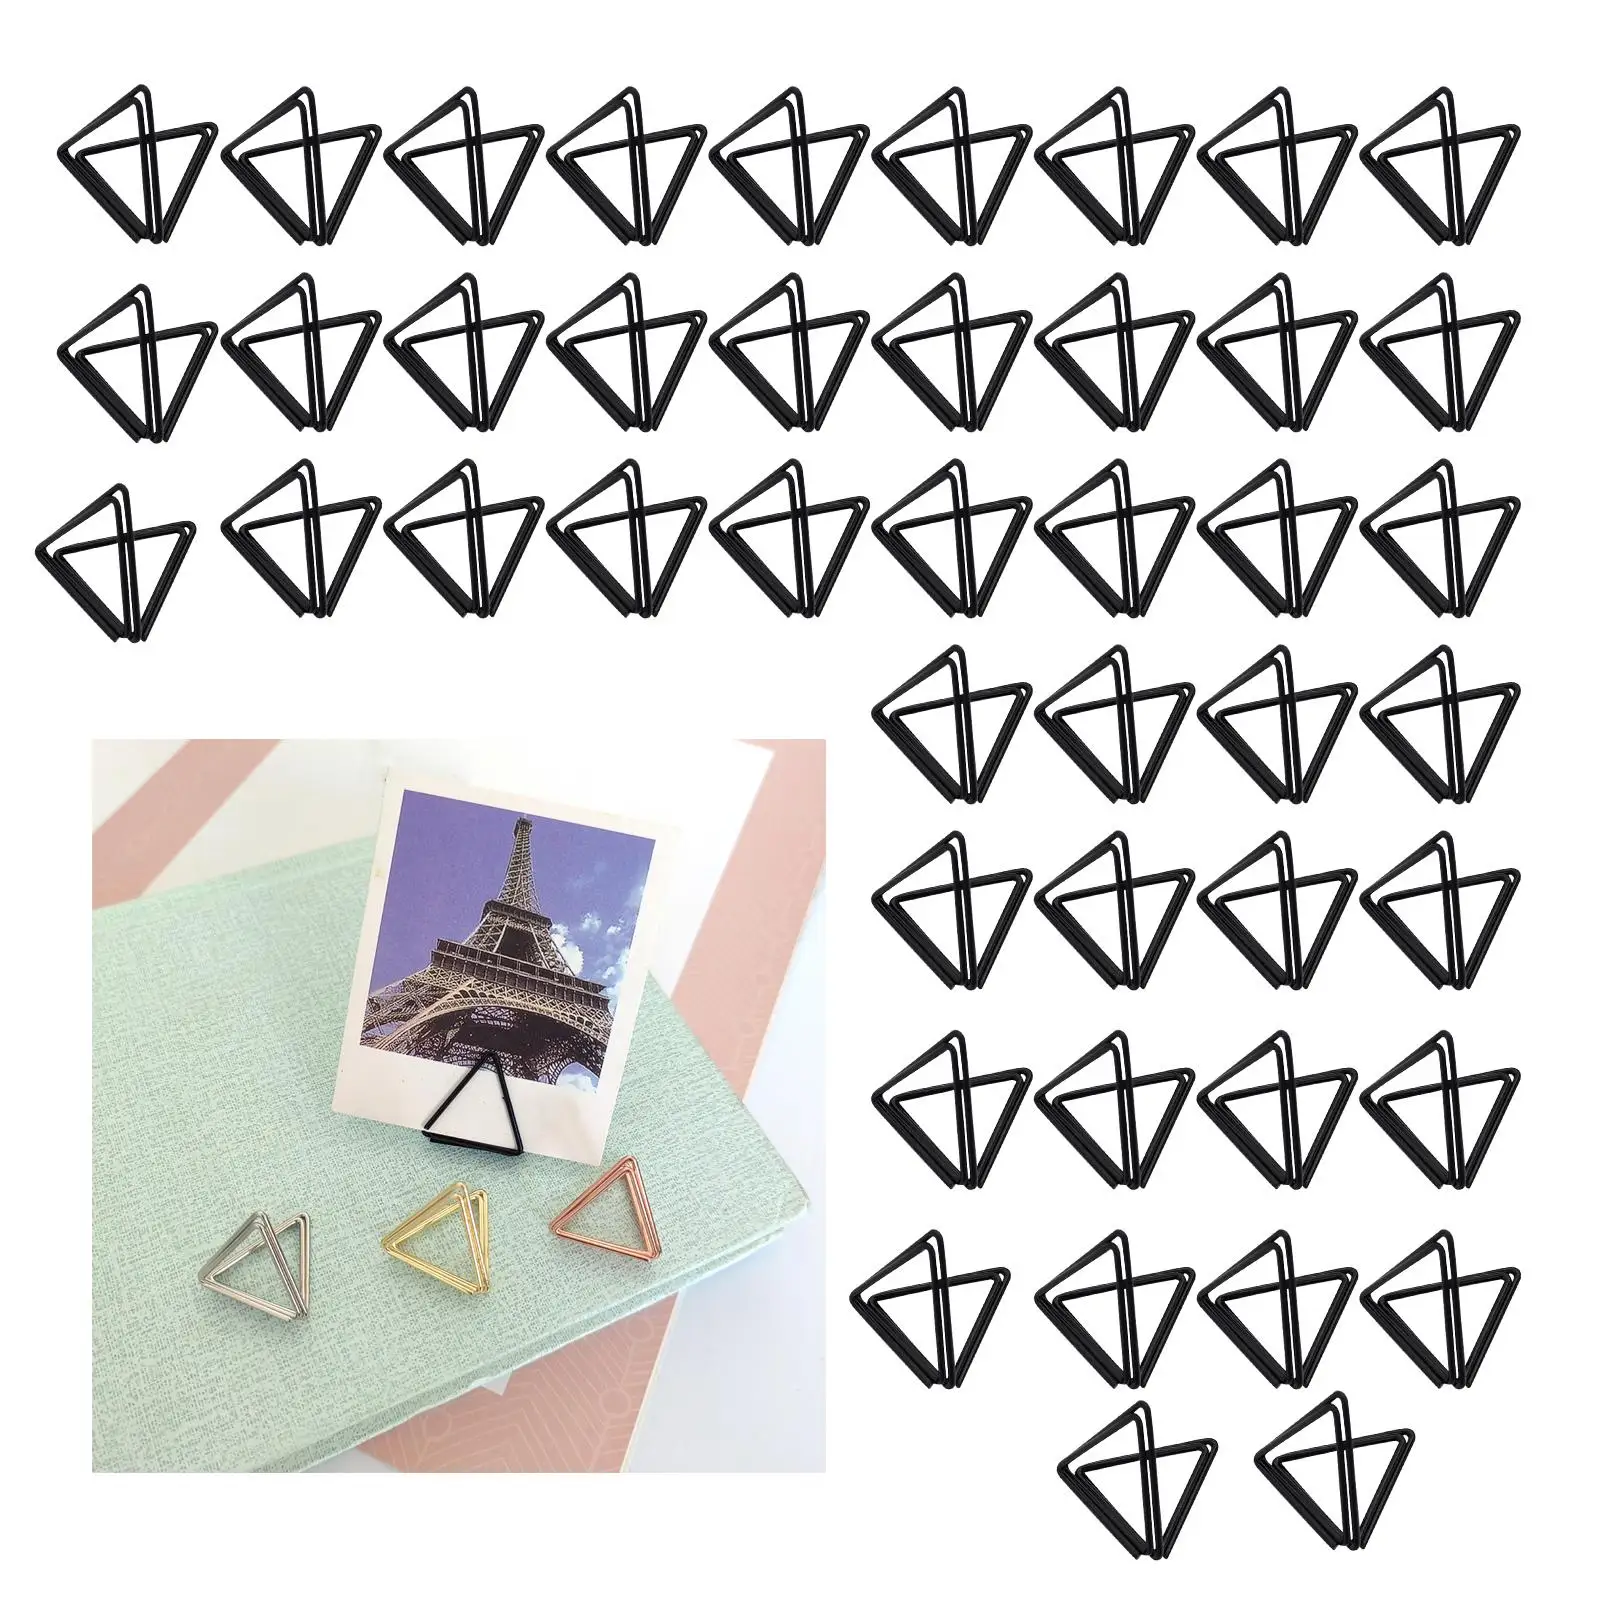 45Pcs Table Card Holders, Triangle Shape Wedding Table Number Holders, Photo Holder Pictures Stand Clips